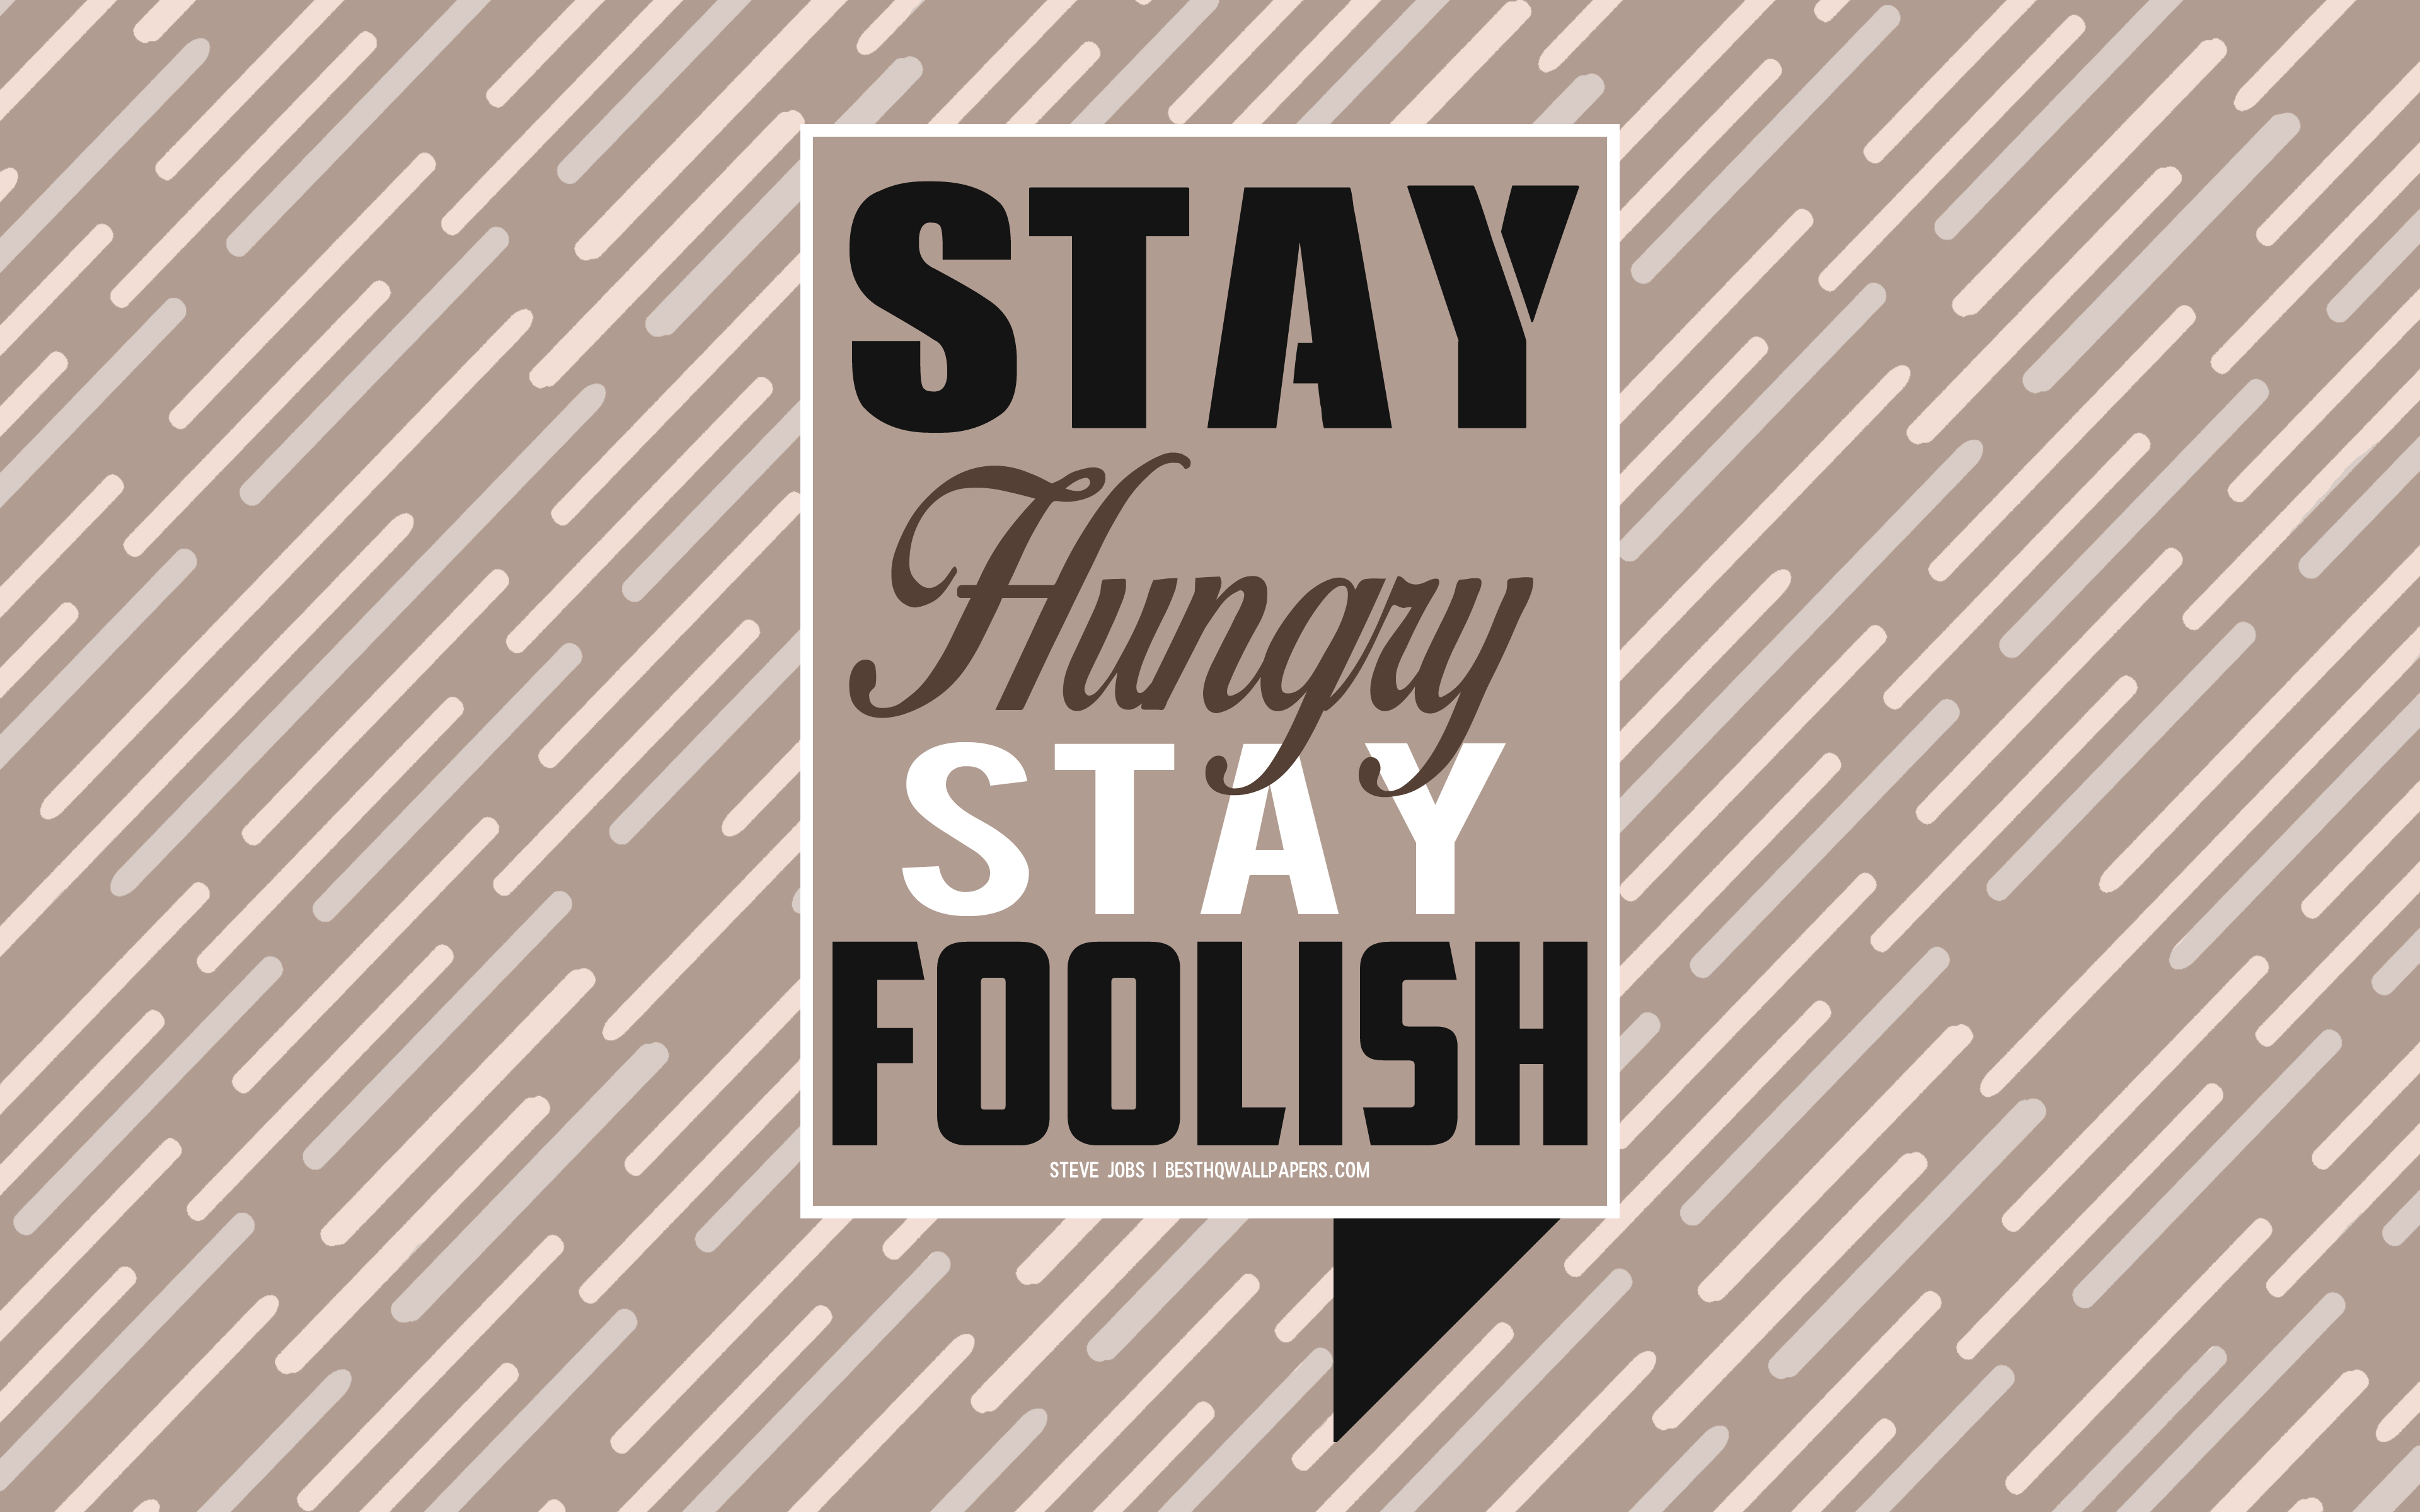 Stay Hungry Stay Foolish, Steve Jobs Quotes, Motivation - Quotes Stay Hungry Stay Foolish Fondos - HD Wallpaper 